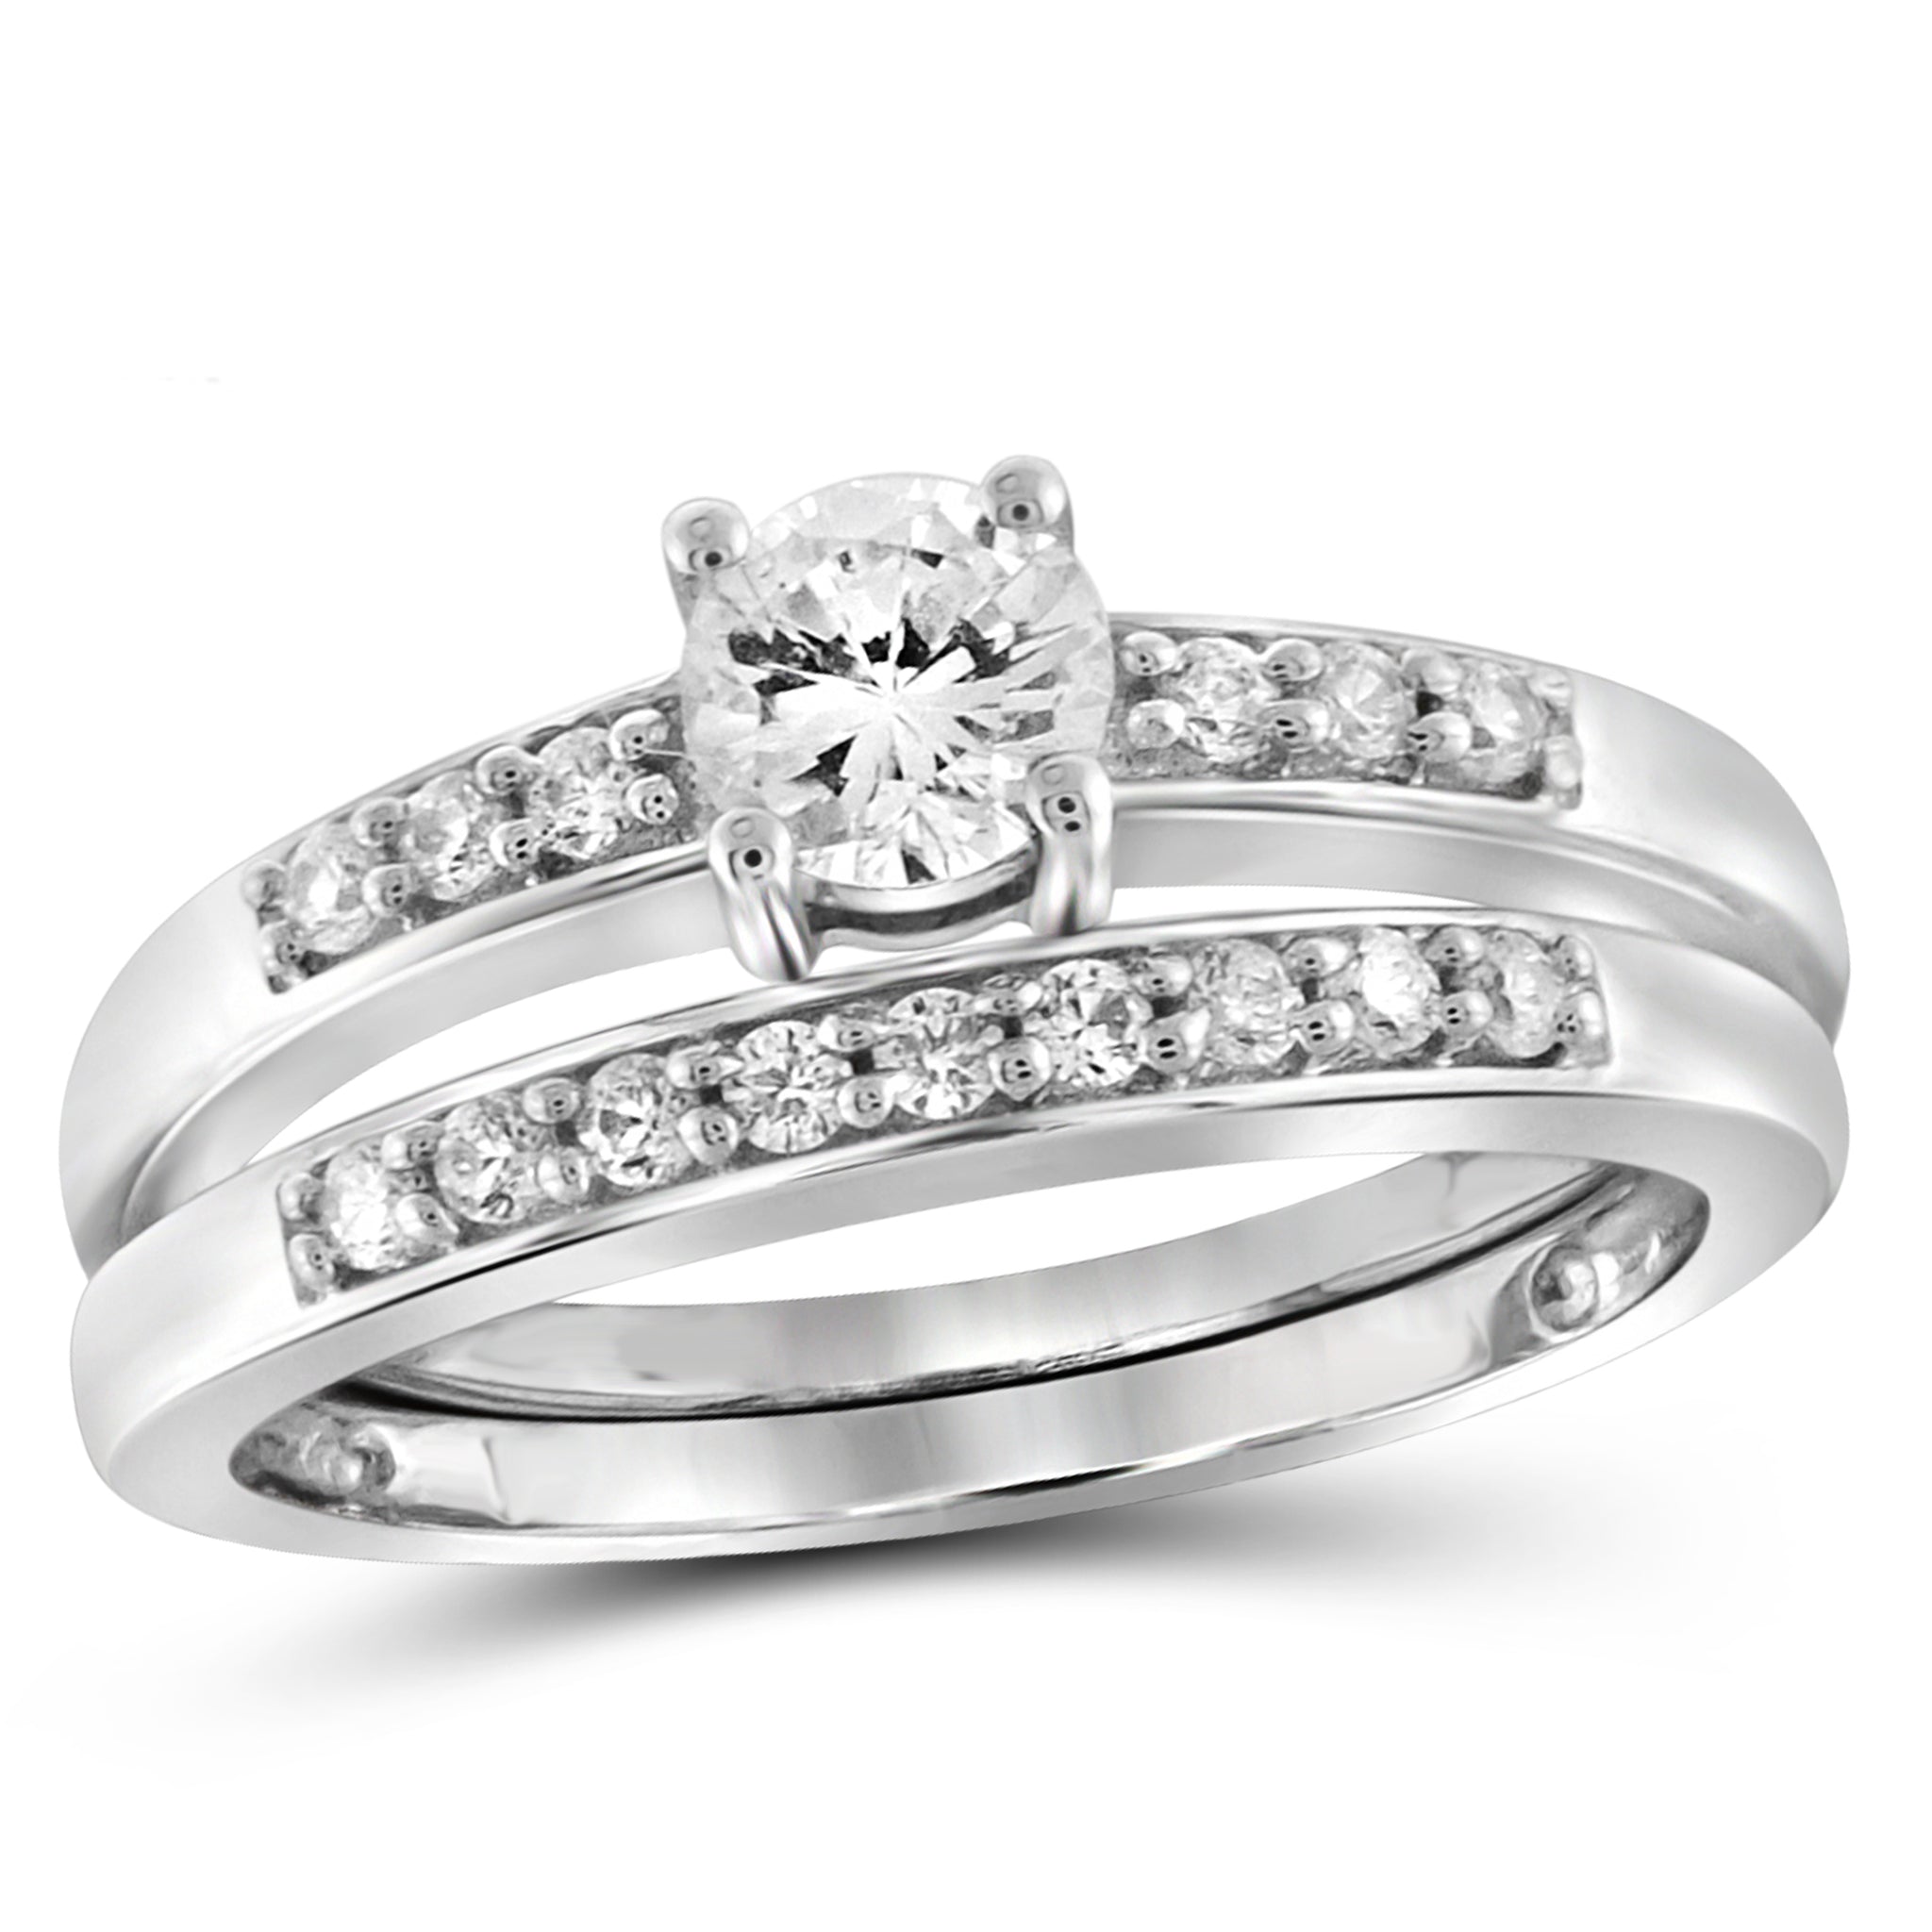 White Cubic Zirconia (AAA) Sterling Silver Bridal Set